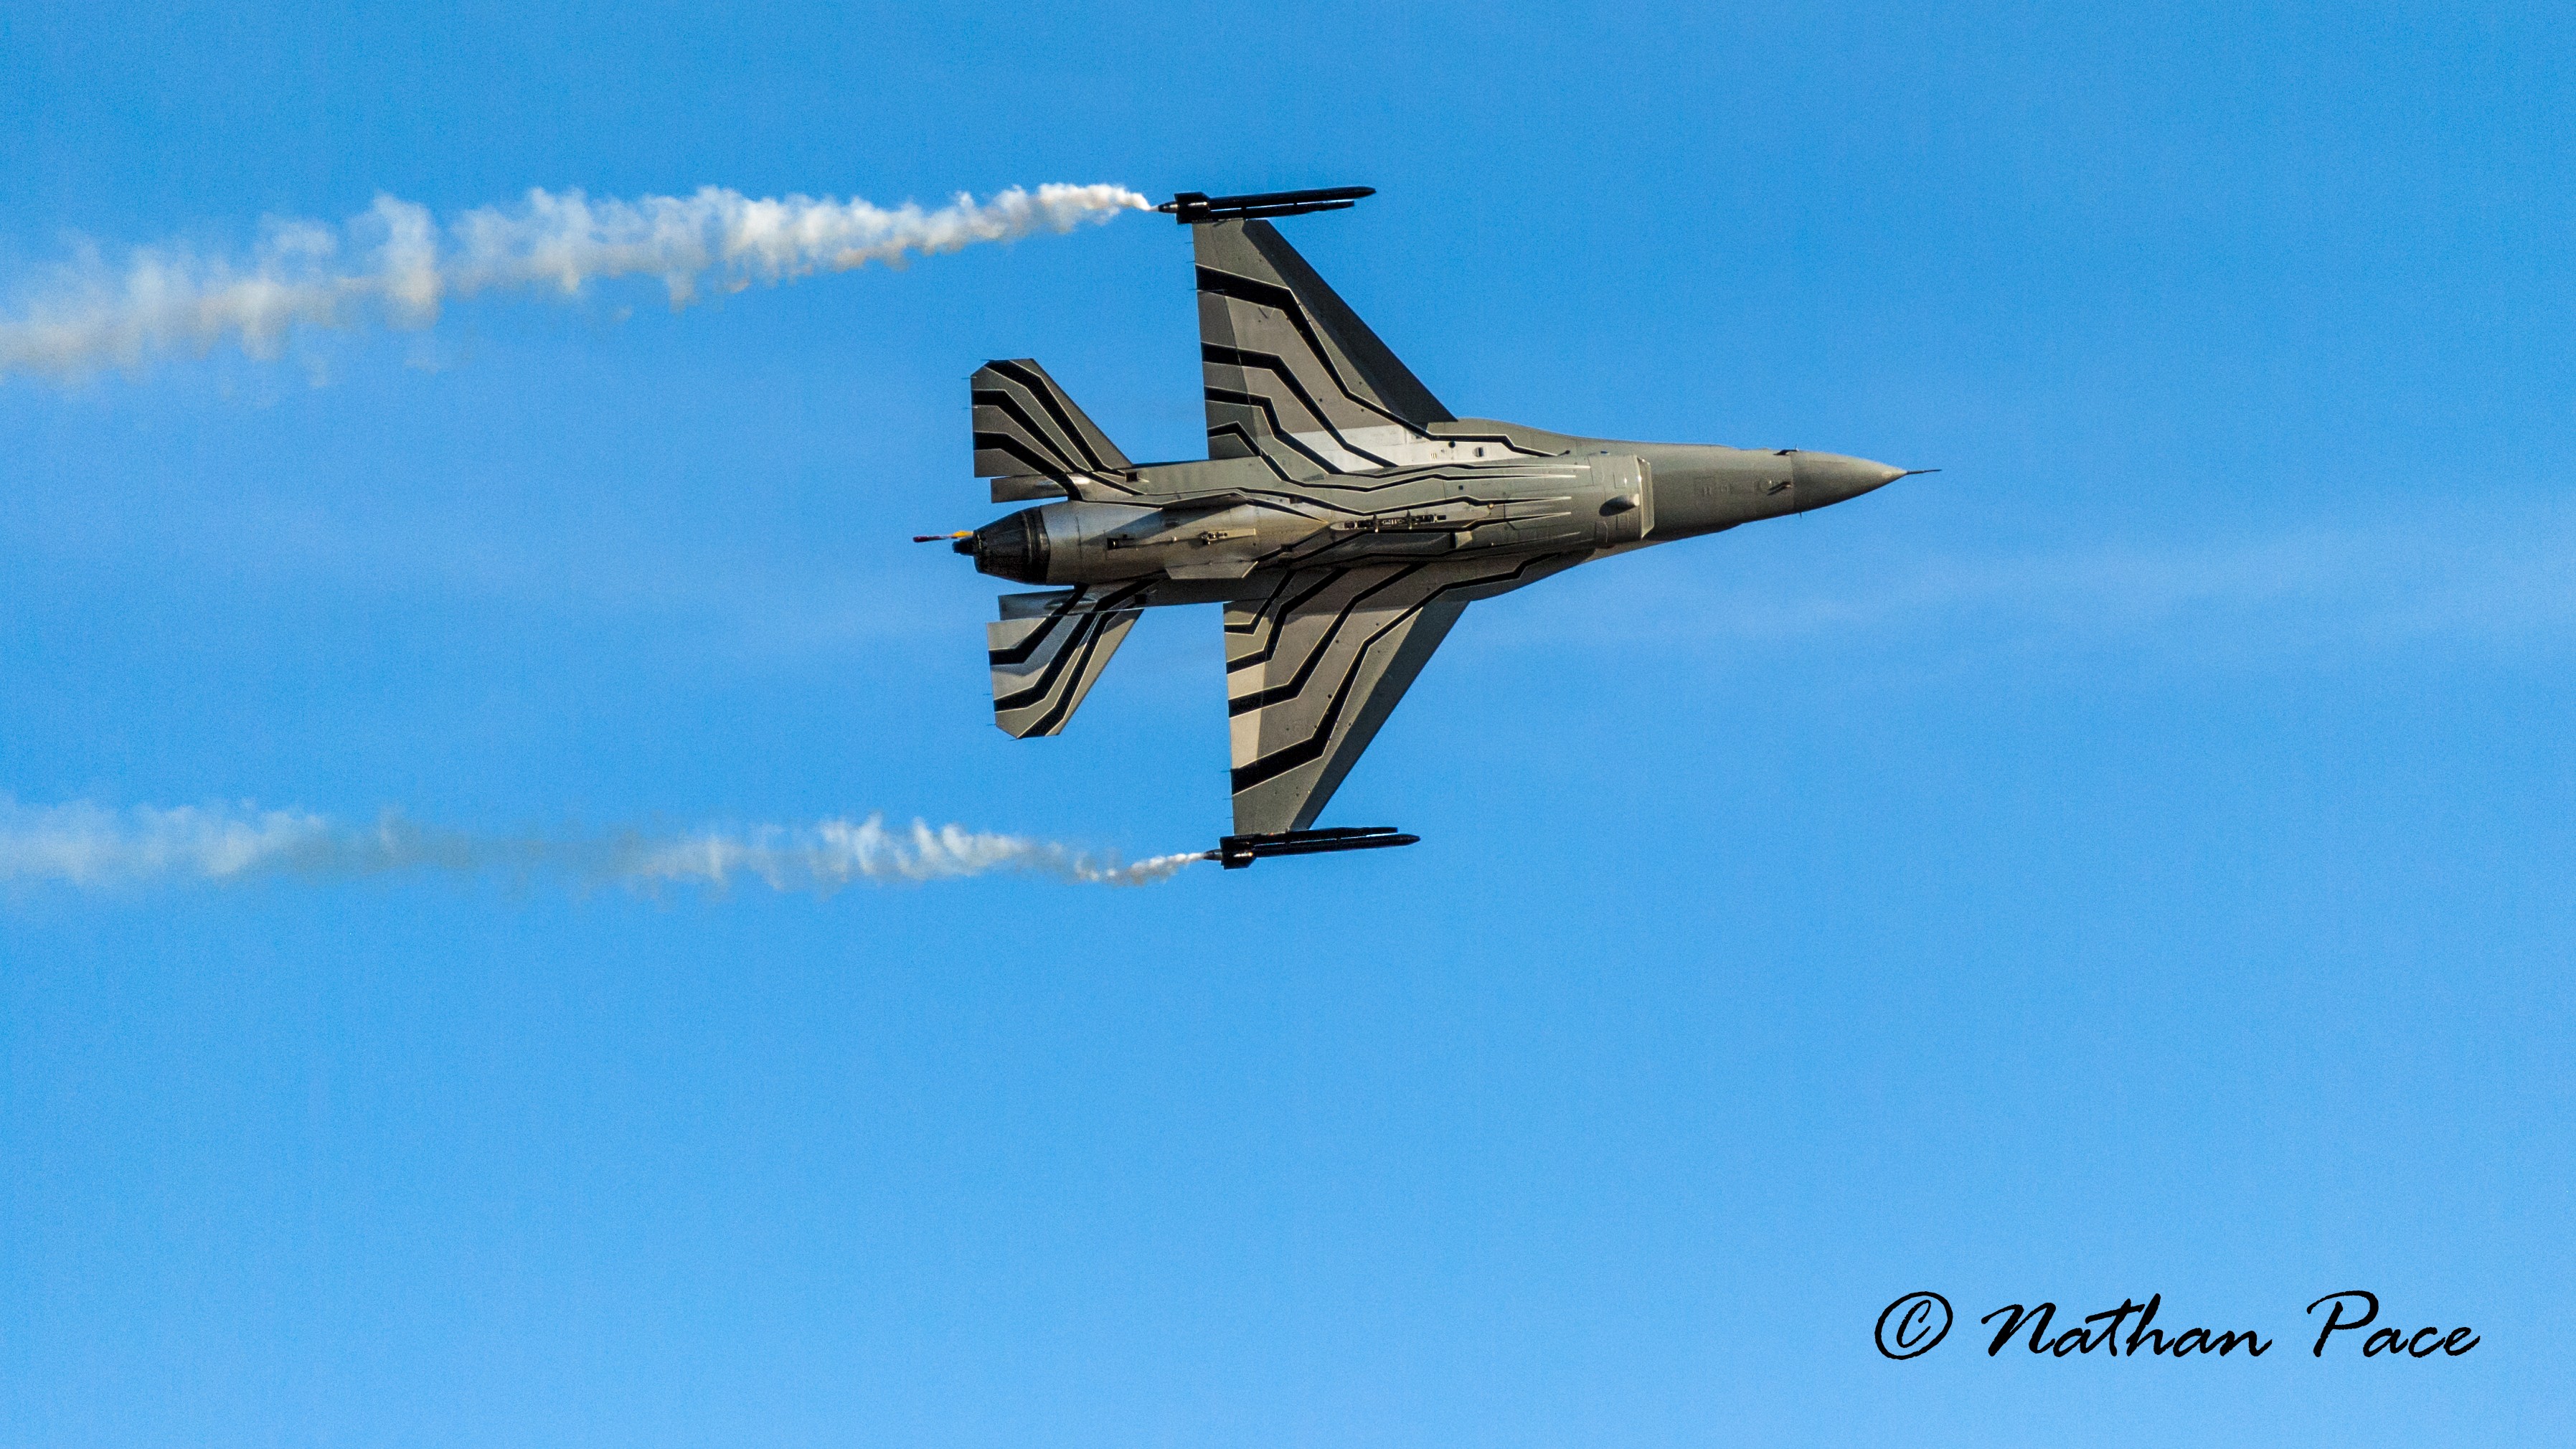 General 3591x2020 jet fighter Malta military aircraft aircraft military vehicle military vehicle watermarked Belgian Air Force General Dynamics F-16 Fighting Falcon smoke bottom view General Dynamics American aircraft